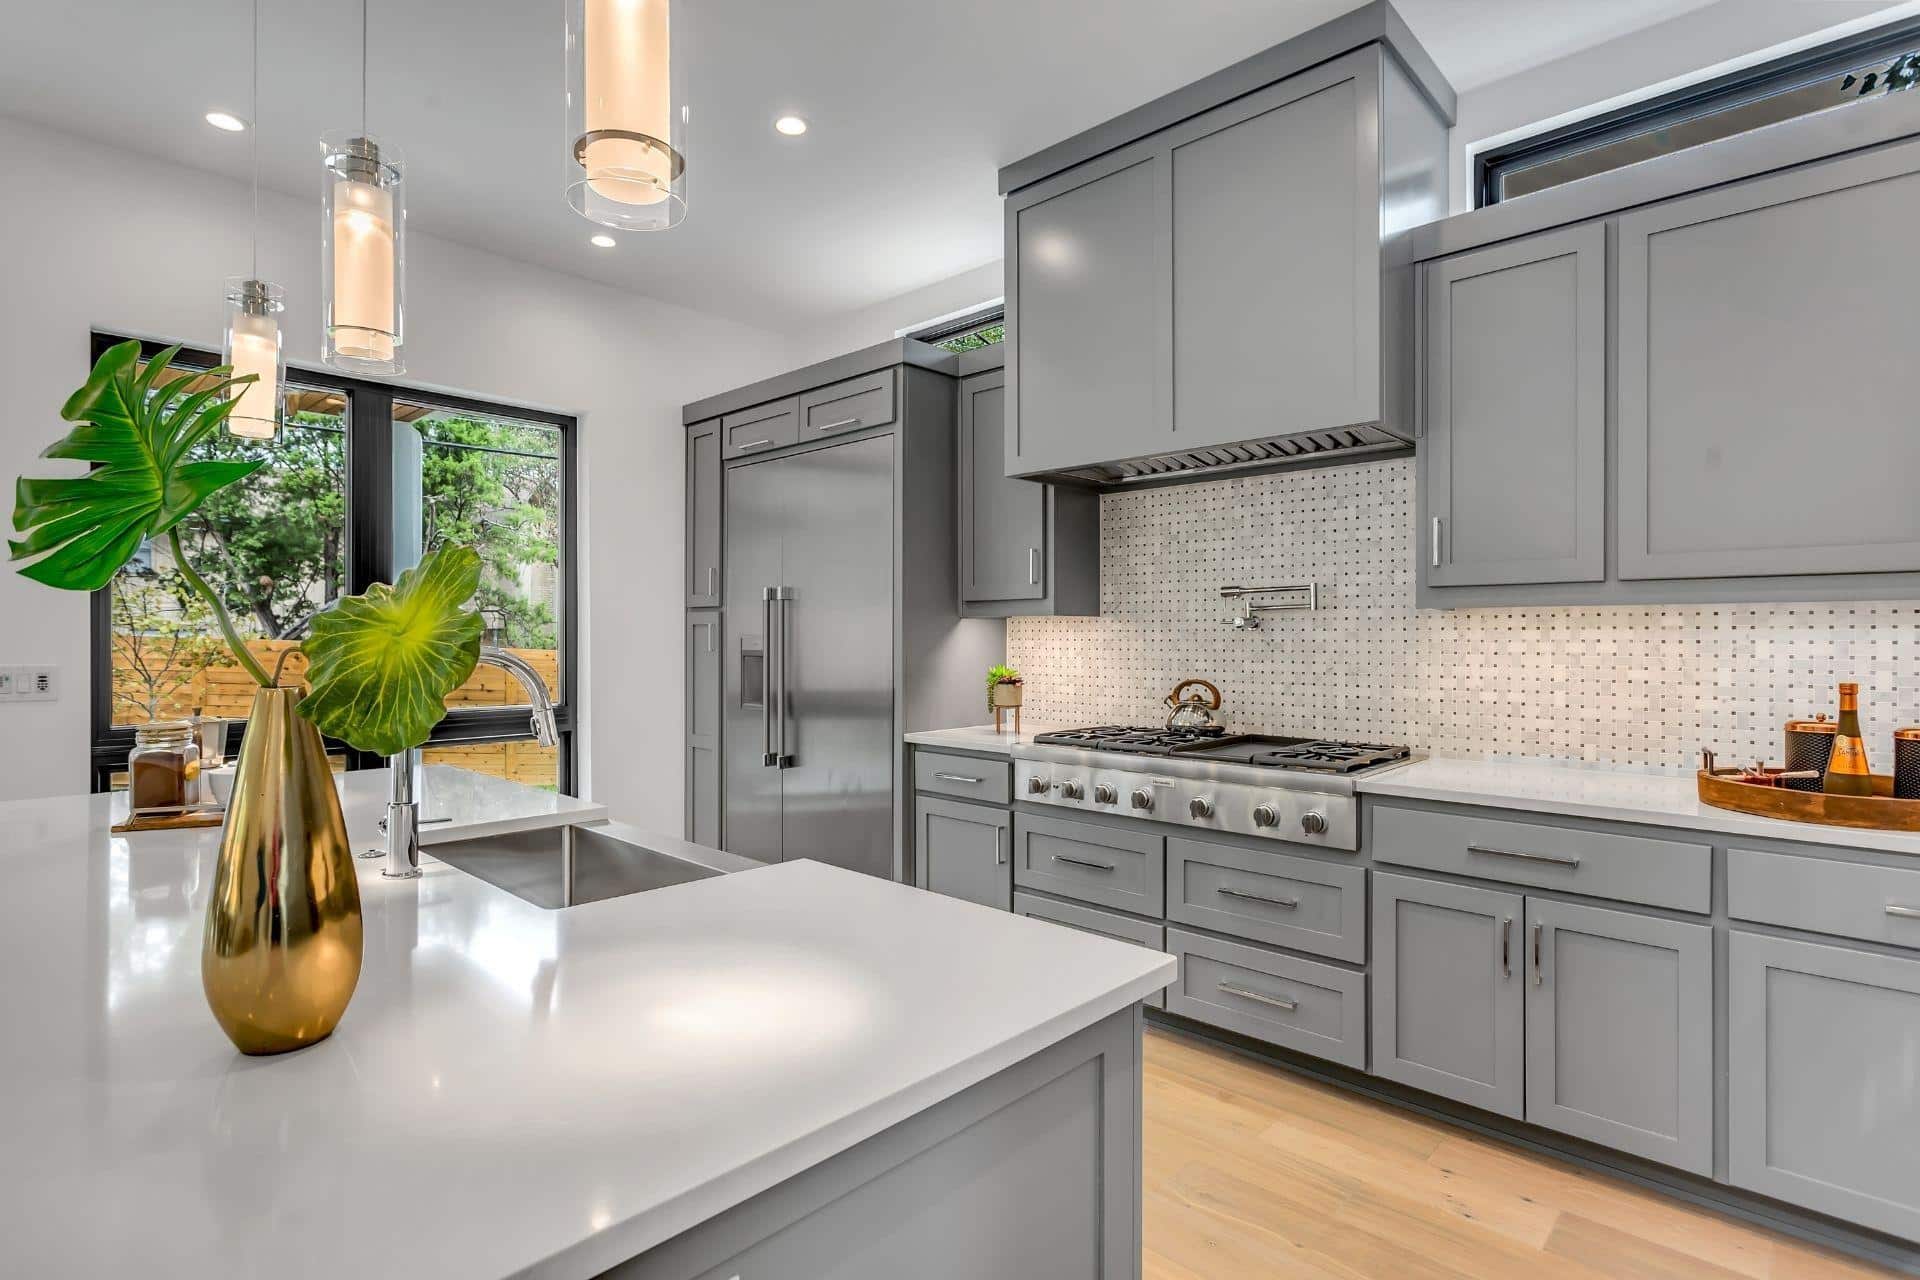 TIPS ON PREPPING FOR RESALE THROUGH A KITCHEN REMODEL